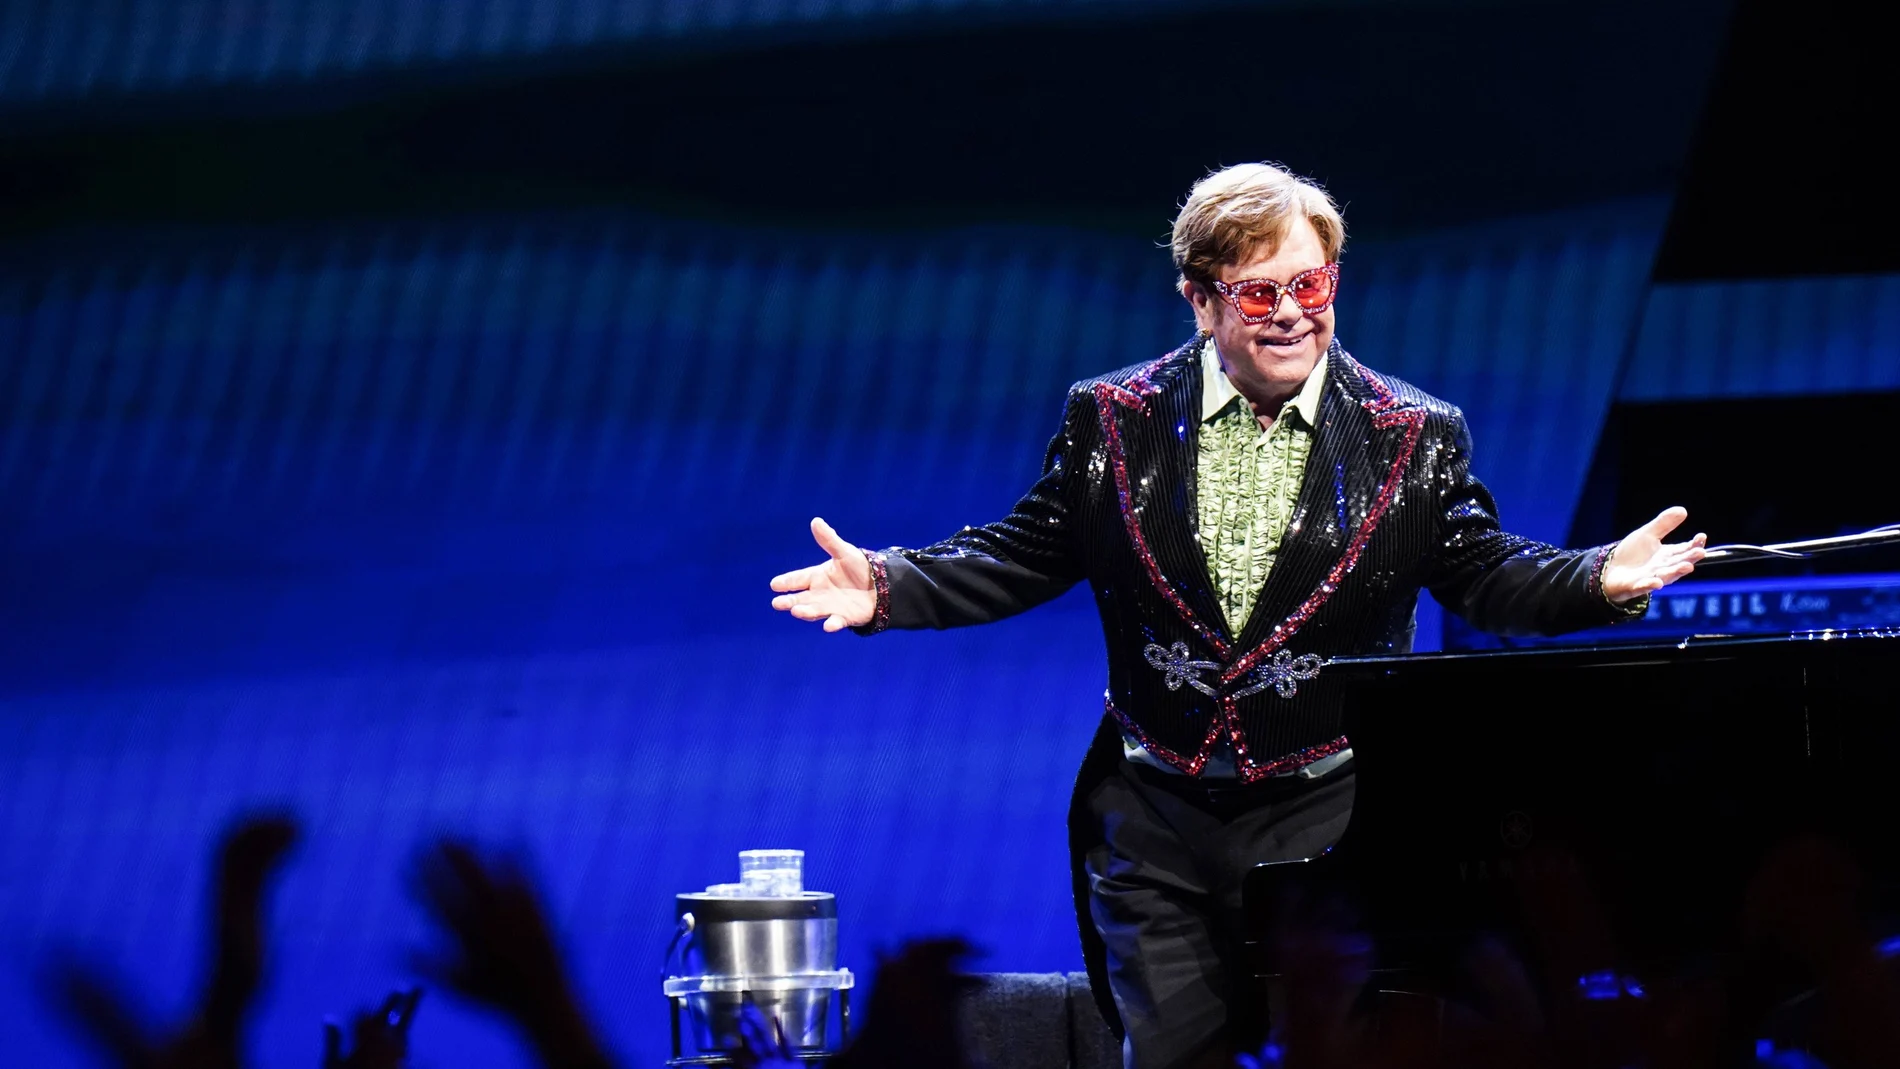 British singer Elton John performs on stage during his Farewell Yellow Brick Road show at the O2 Arena, in south London.